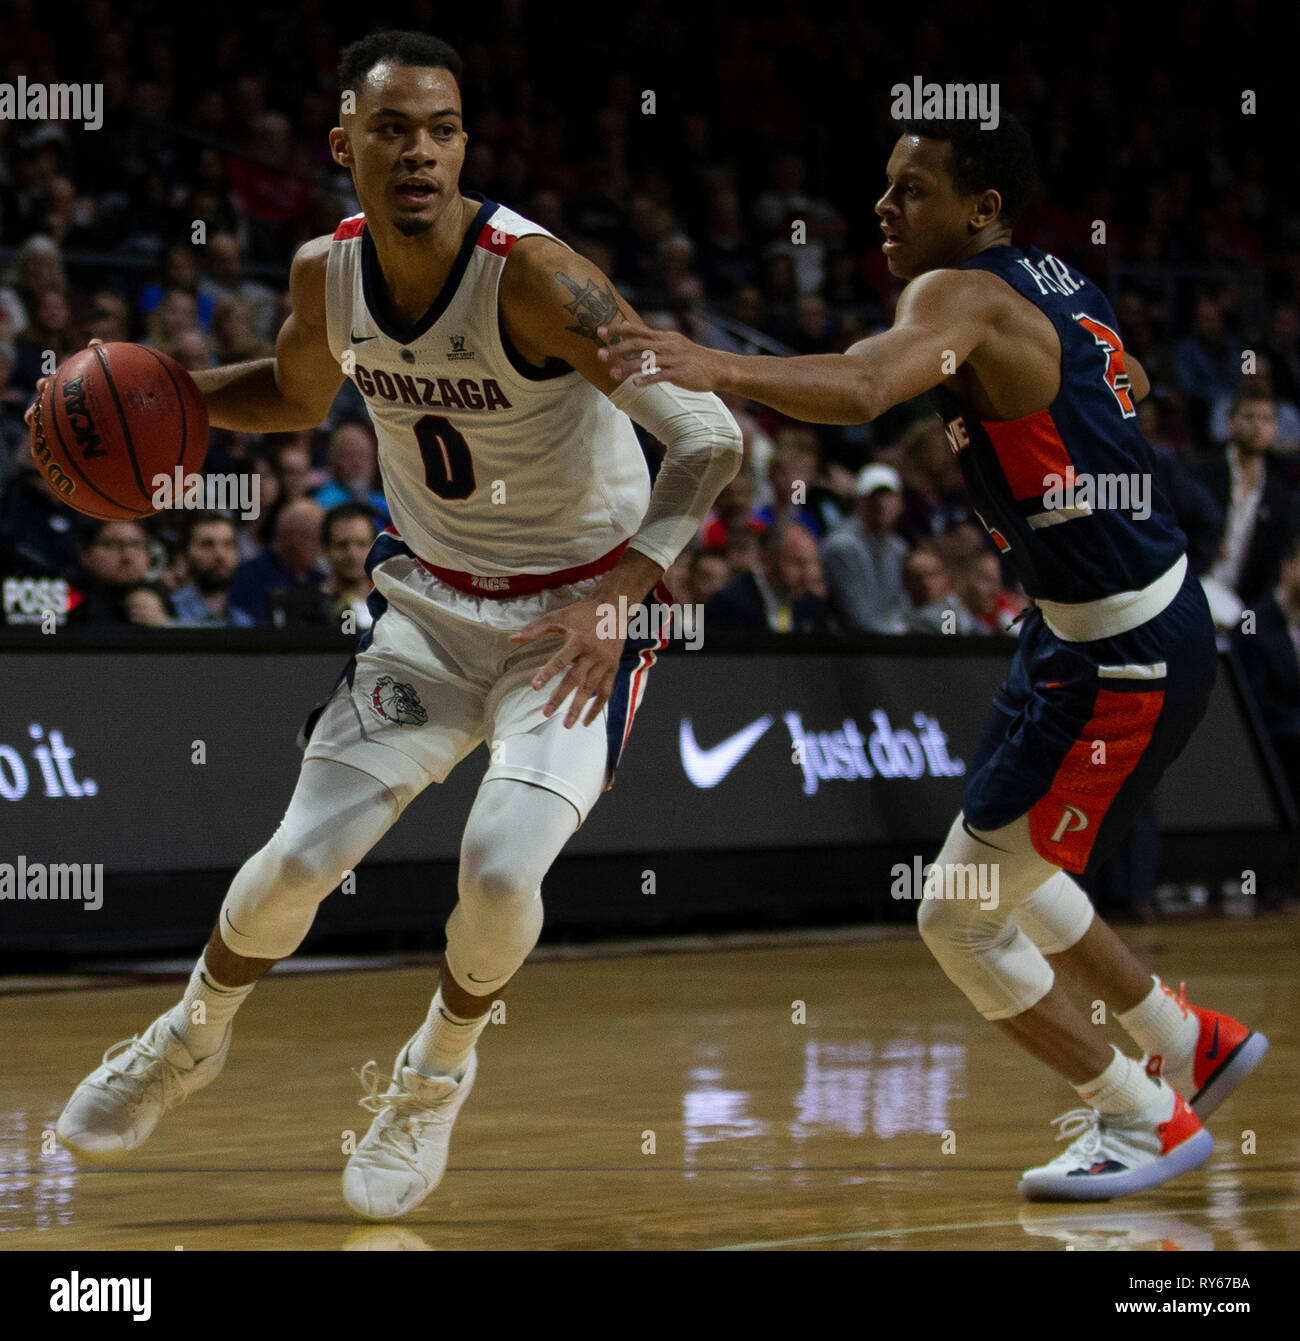 Mar 11 2019 Las Vegas, NV, U.S.A. Gonzaga guard Geno Crandall (0) drives to the basket during the NCAA West Coast Conference Men's Basketball Tournament semi -final between the Pepperdine Wave and the Gonzaga Bulldogs 100-74 win at Orleans Arena Las Vegas, NV. Thurman James/CSM Stock Photo